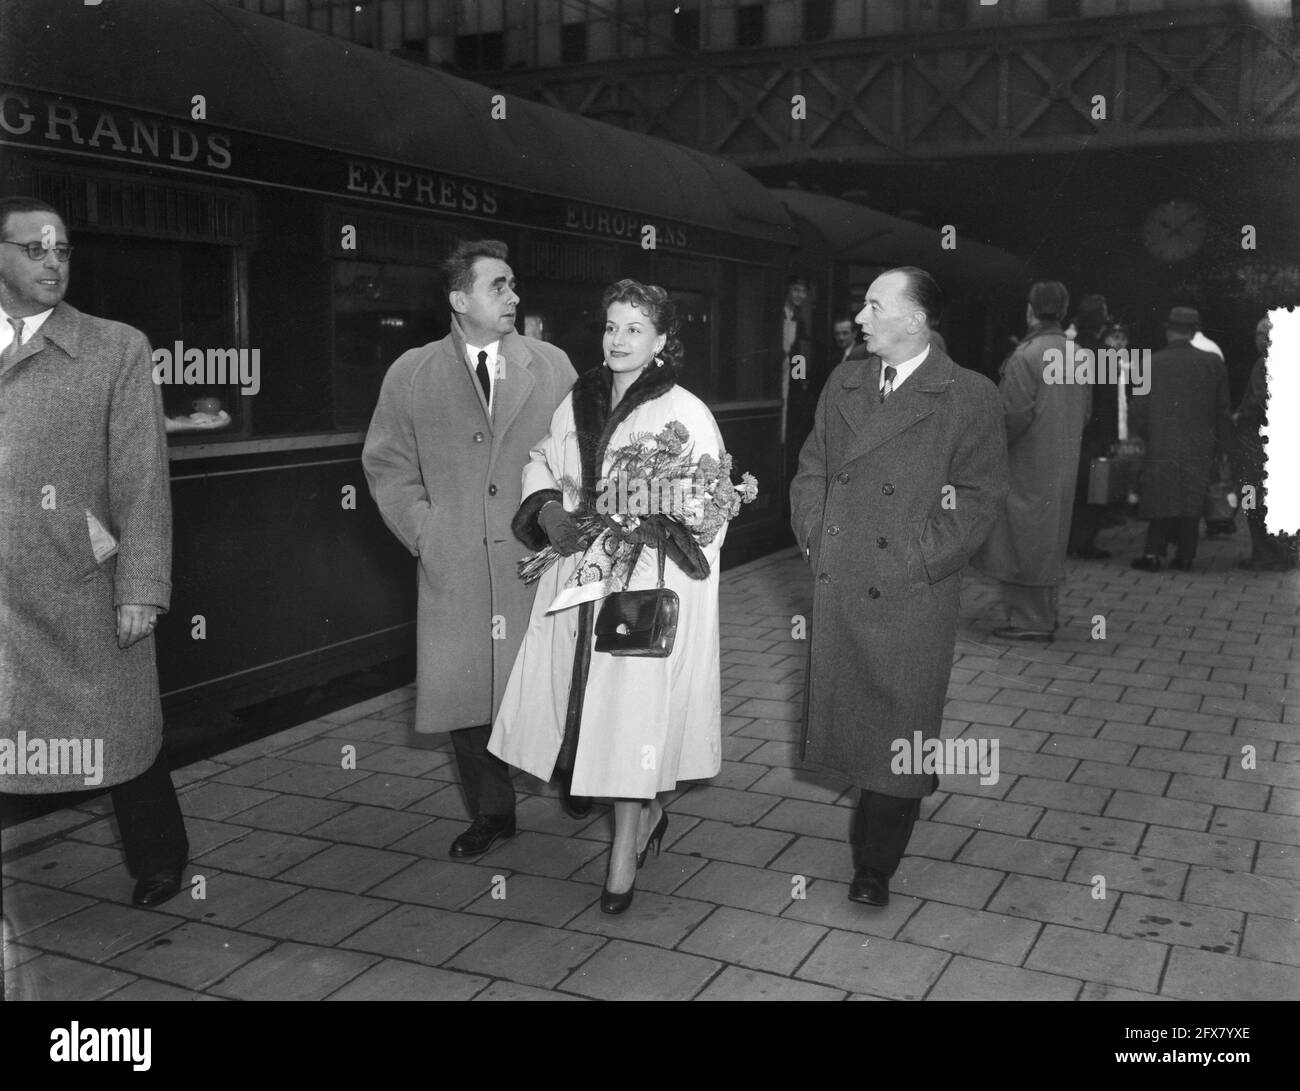 Arrival at Central Station of Henri George Clouzot with his wife Vera, November 18, 1953, actresses, film directors, railroads, stations, The Netherlands, 20th century press agency photo, news to remember, documentary, historic photography 1945-1990, visual stories, human history of the Twentieth Century, capturing moments in time Stock Photo